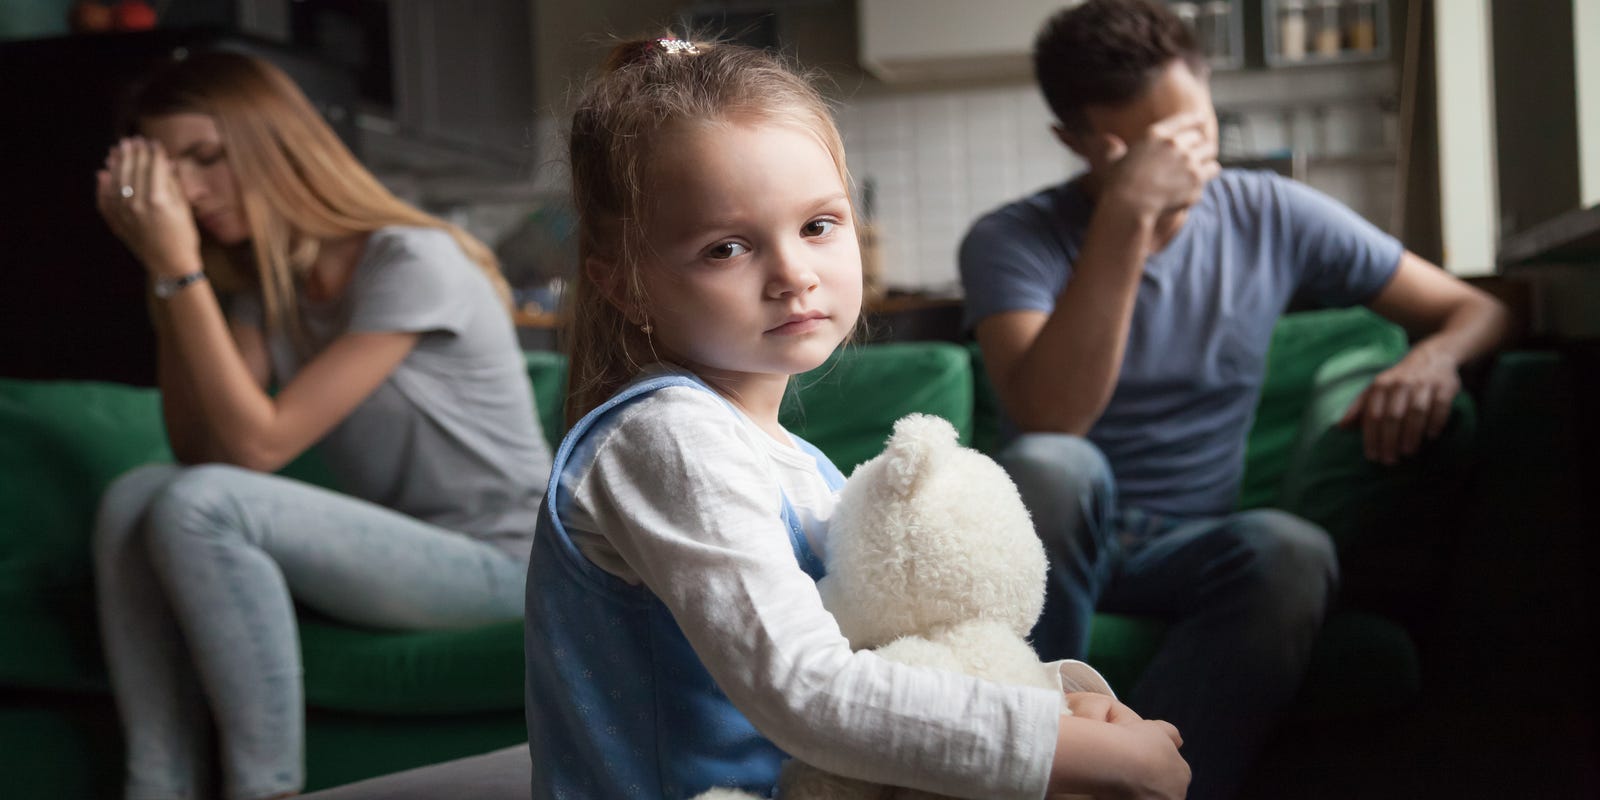 Parents can help kids be happy after divorce. Here's how